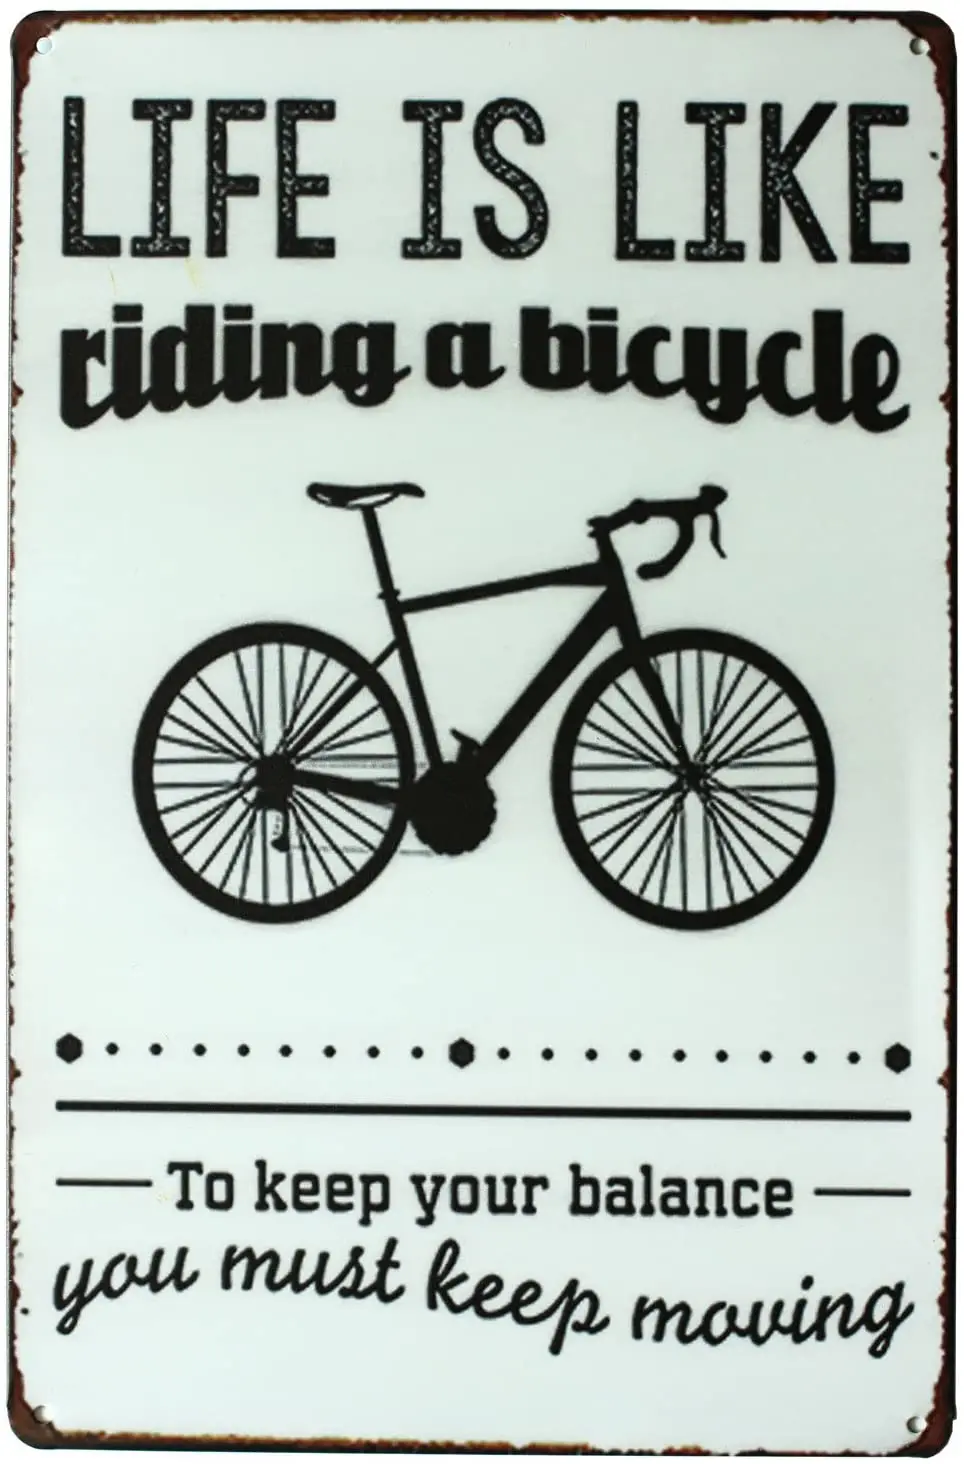 

Life is Like Riding A Bicycle You Much Keep Moving, Metal Tin Sign, Vintage Art Poster Plaque Garage Home Wall Decor